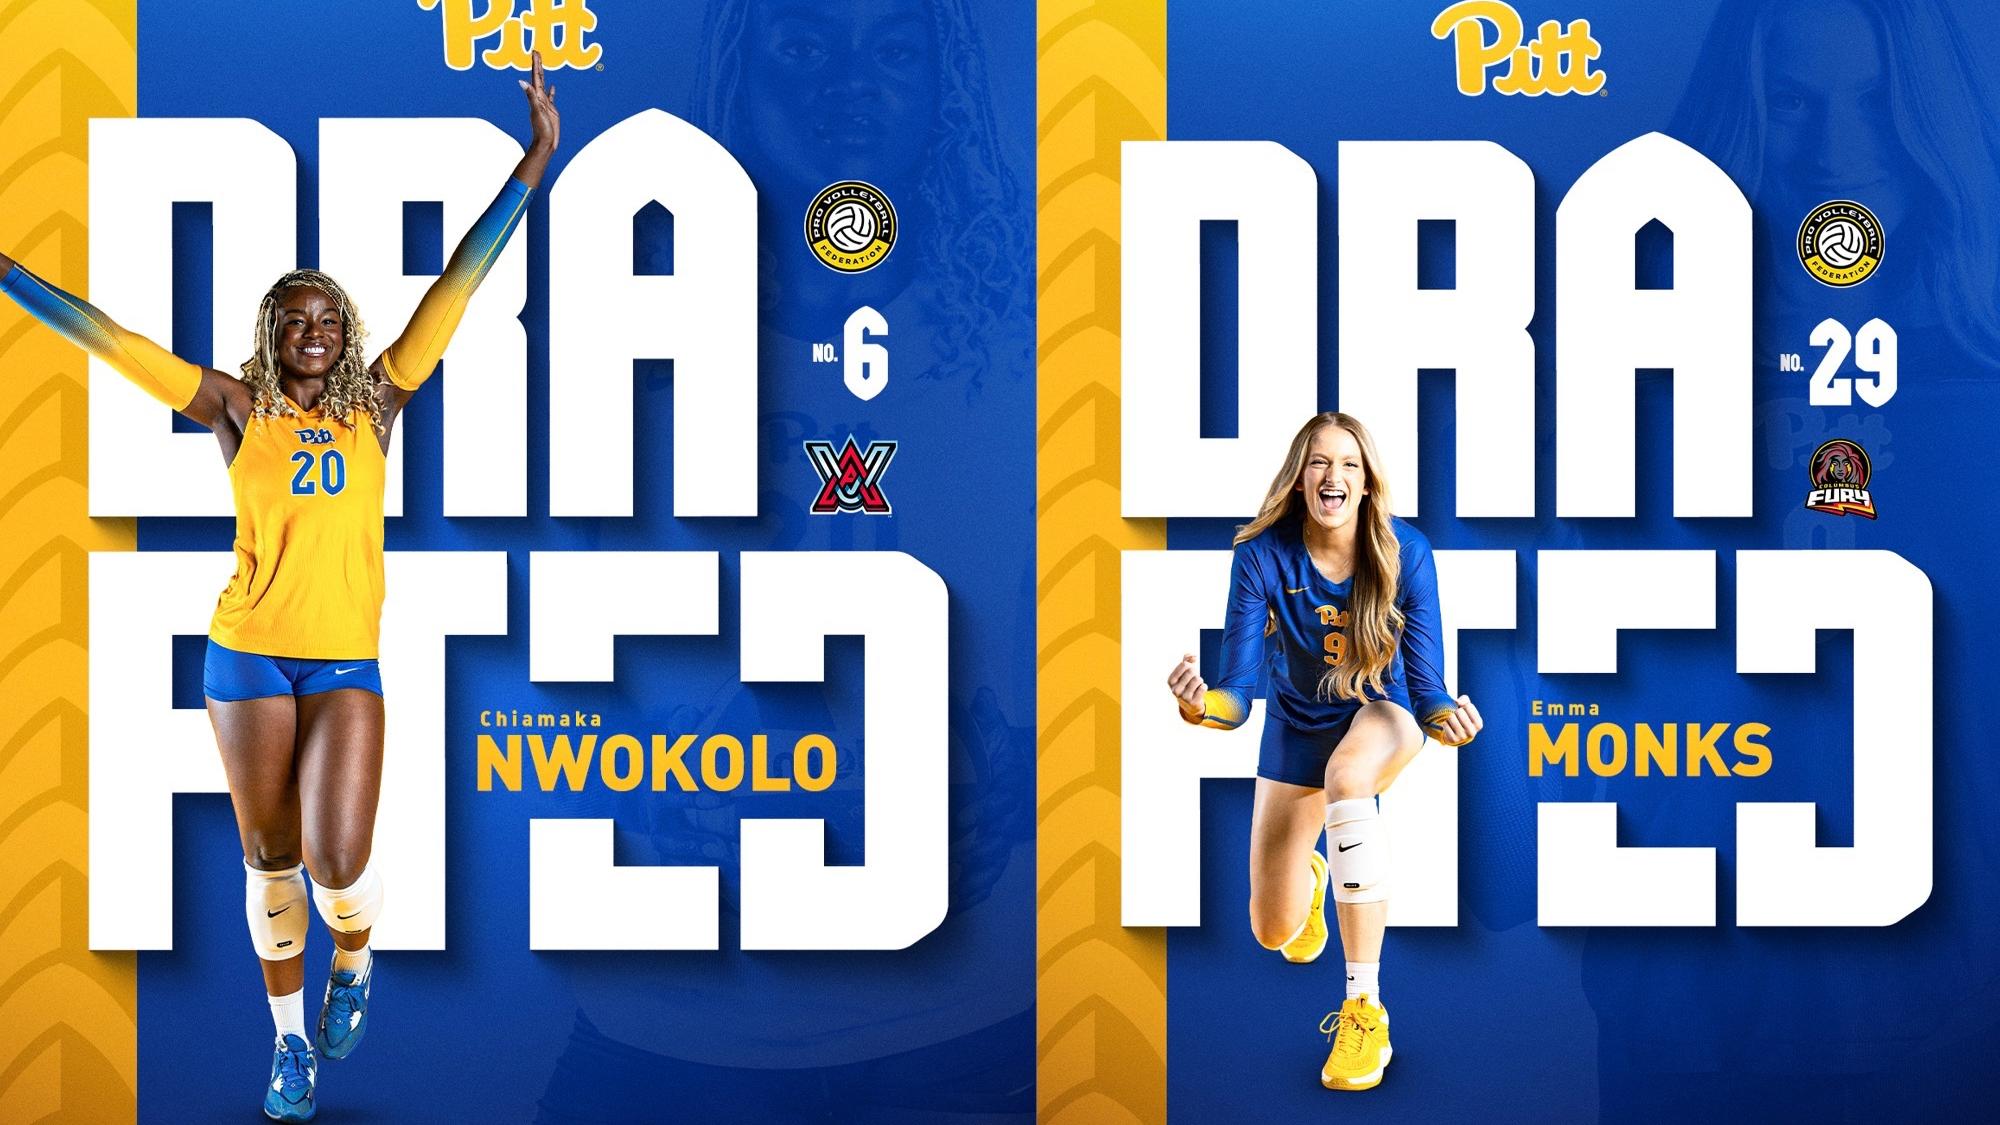 Nwokolo, Monks Drafted in Pro Volleyball Federation Draft VCP Volleyball